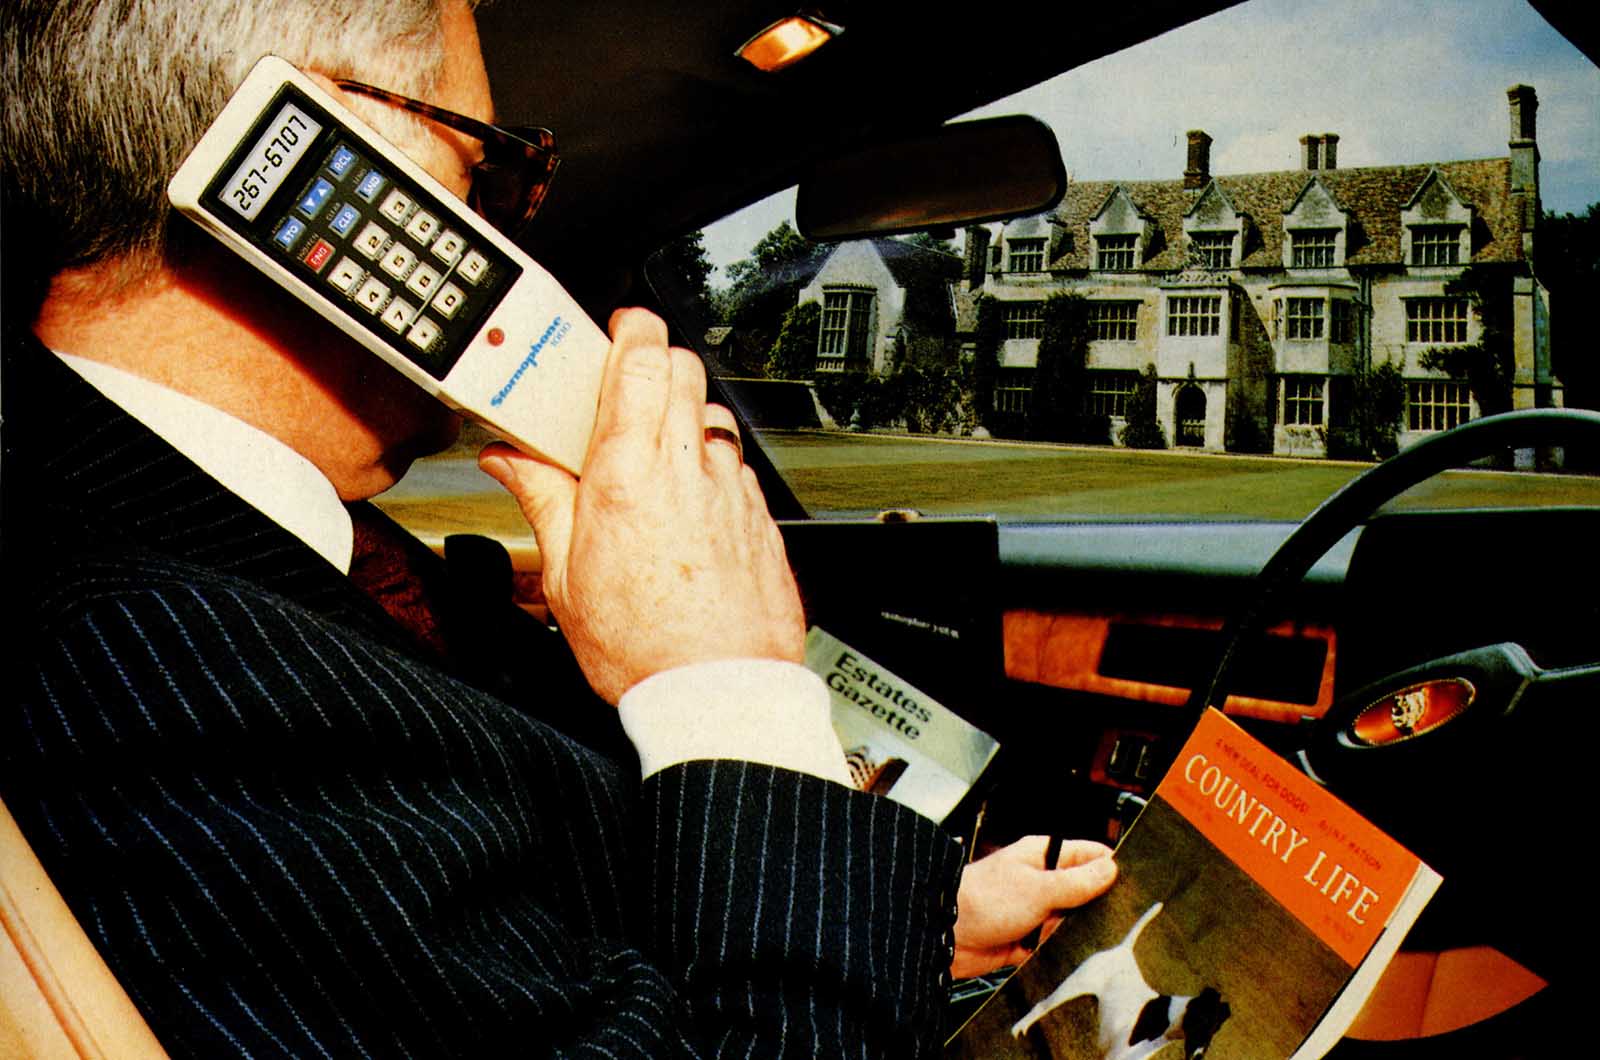 Talking dashboards, car phones and graphic equalisers: The '80s car tech we still miss